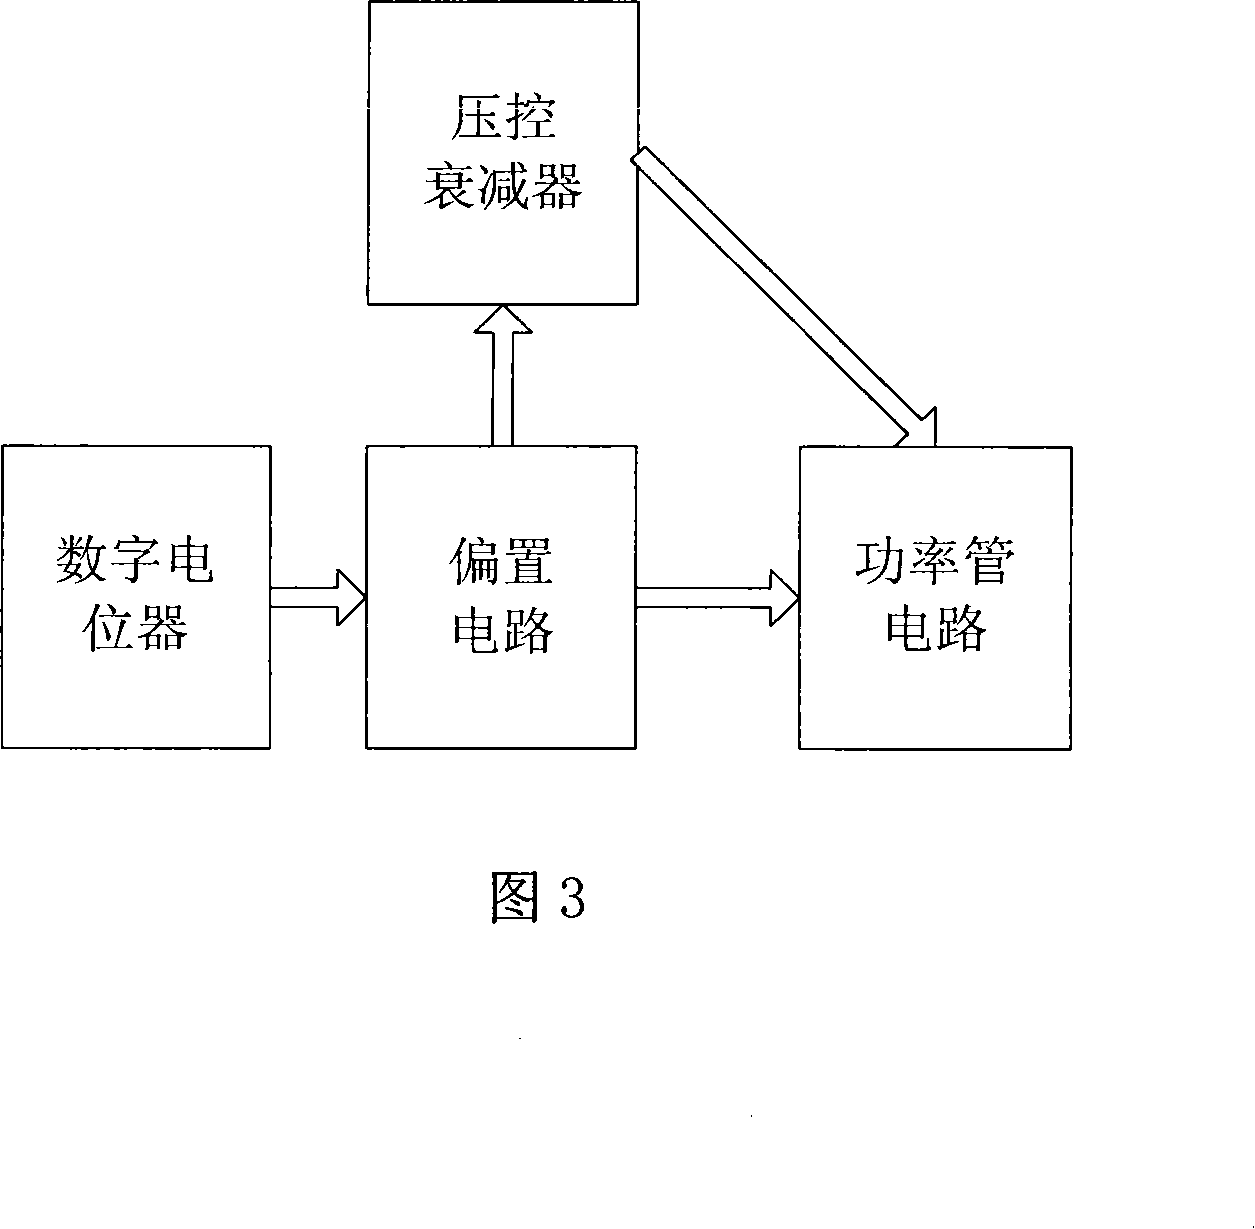 Power amplification circuit and its initialization method and power amplification method